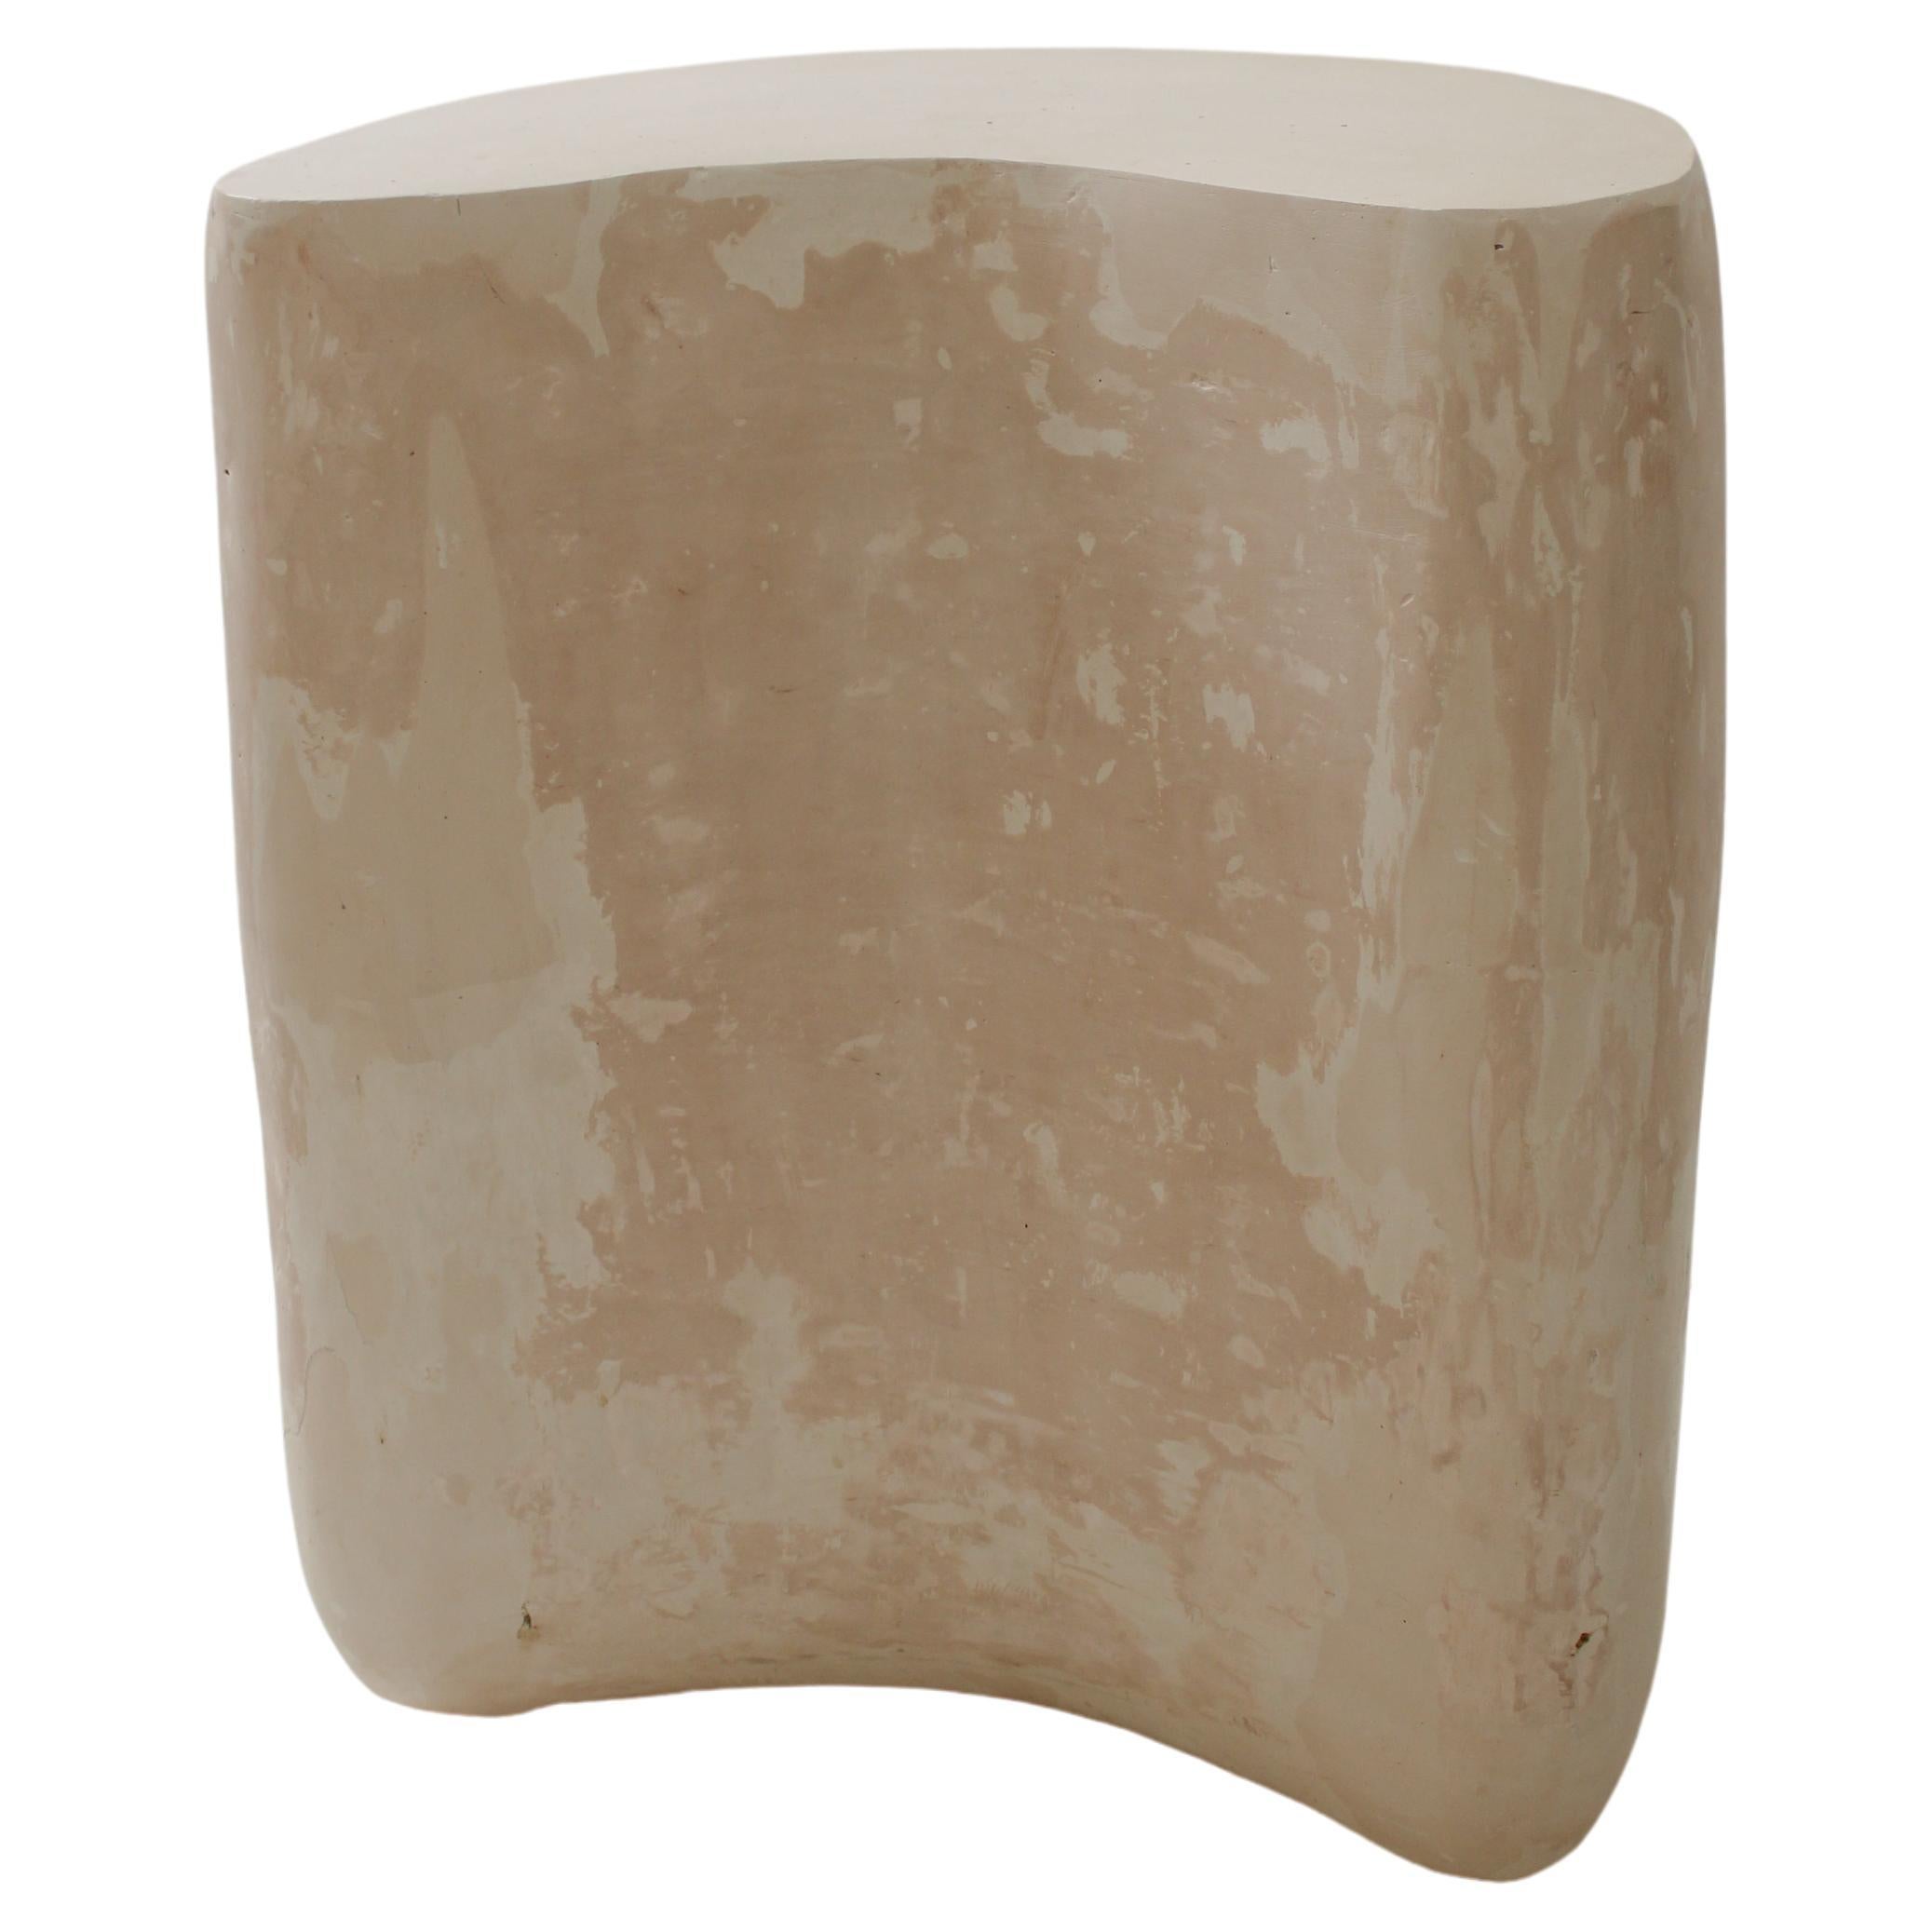 Organic Side Table 03 - Handmade Gypsum Side Table - Limited Collectible Design